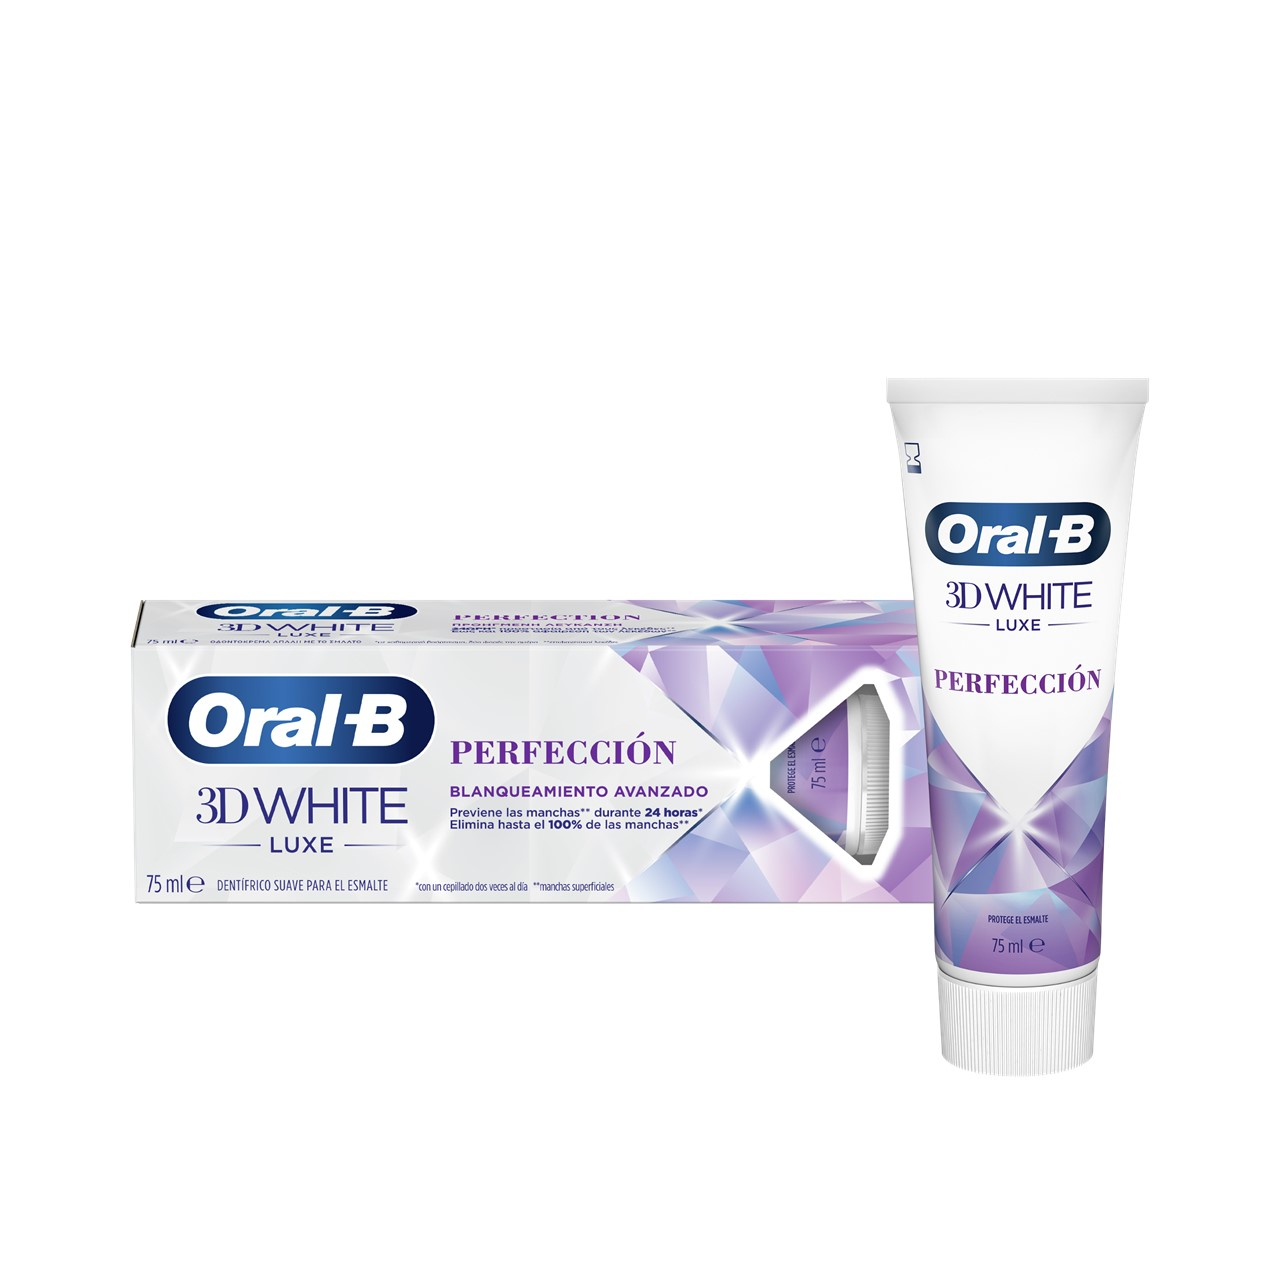 spade Glimte pige Buy Oral-B 3D White Luxe Perfection Toothpaste 75ml · Iceland